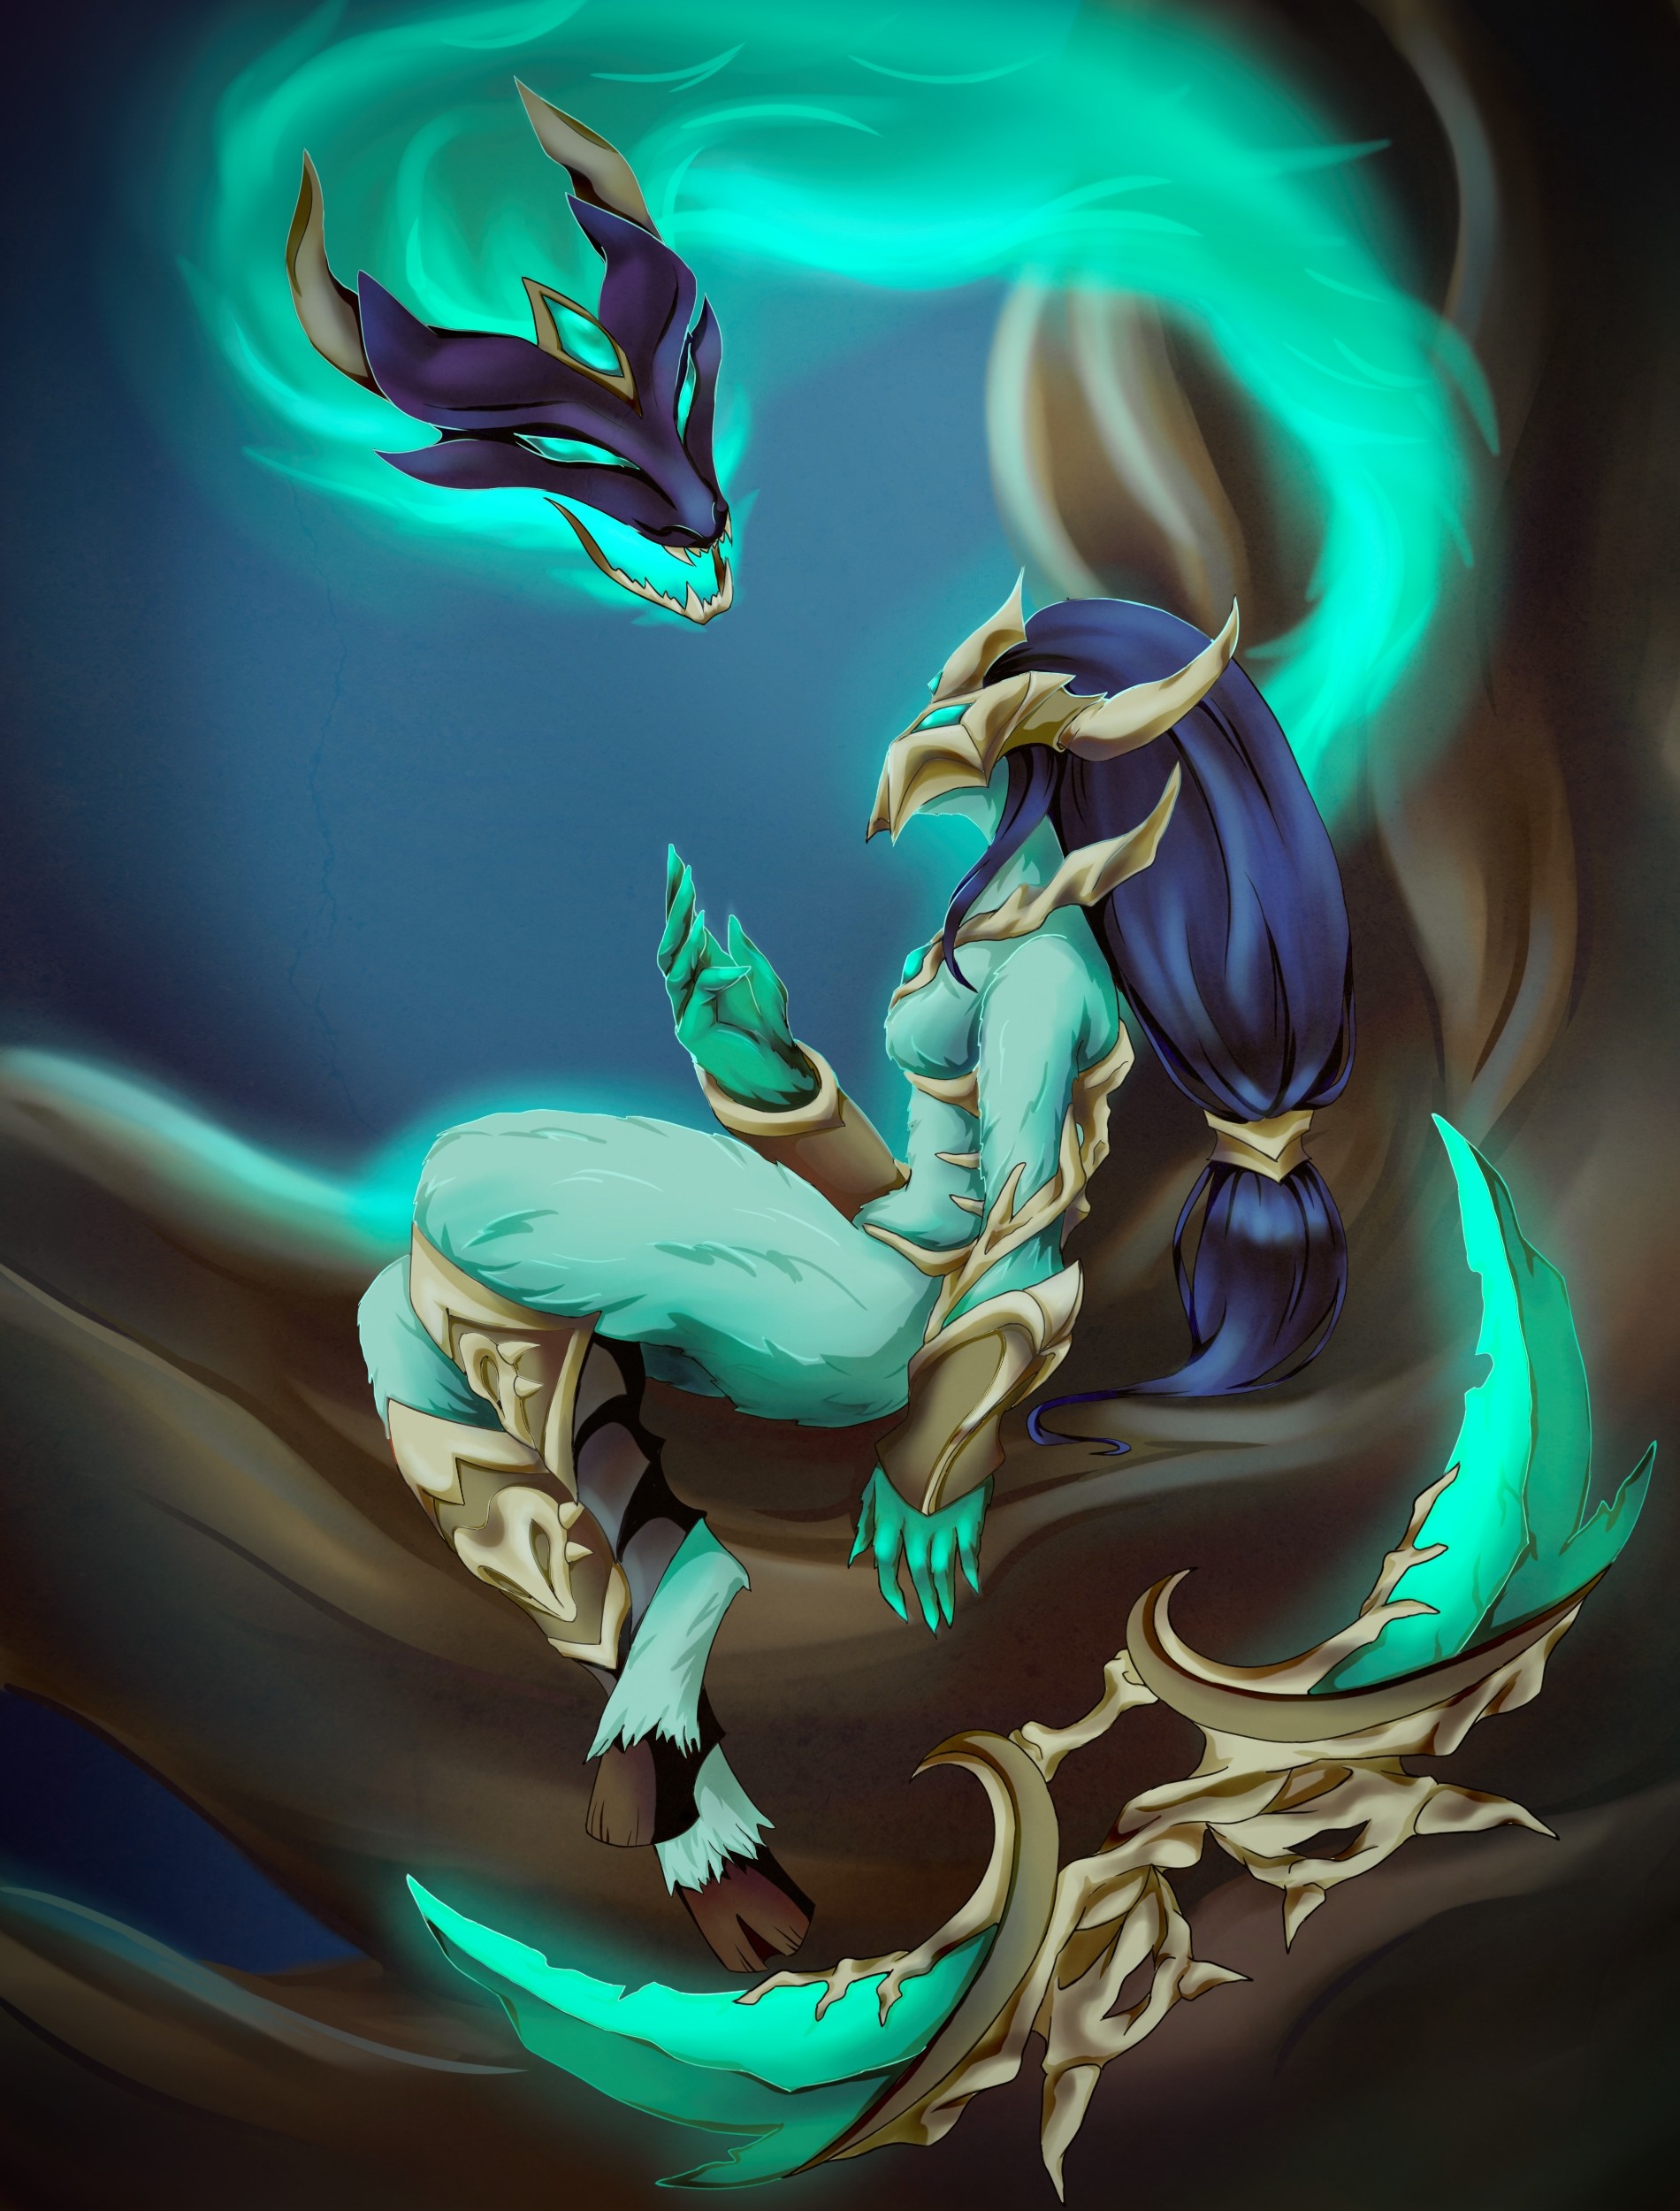 My skin concept for Kindred from League of legends.